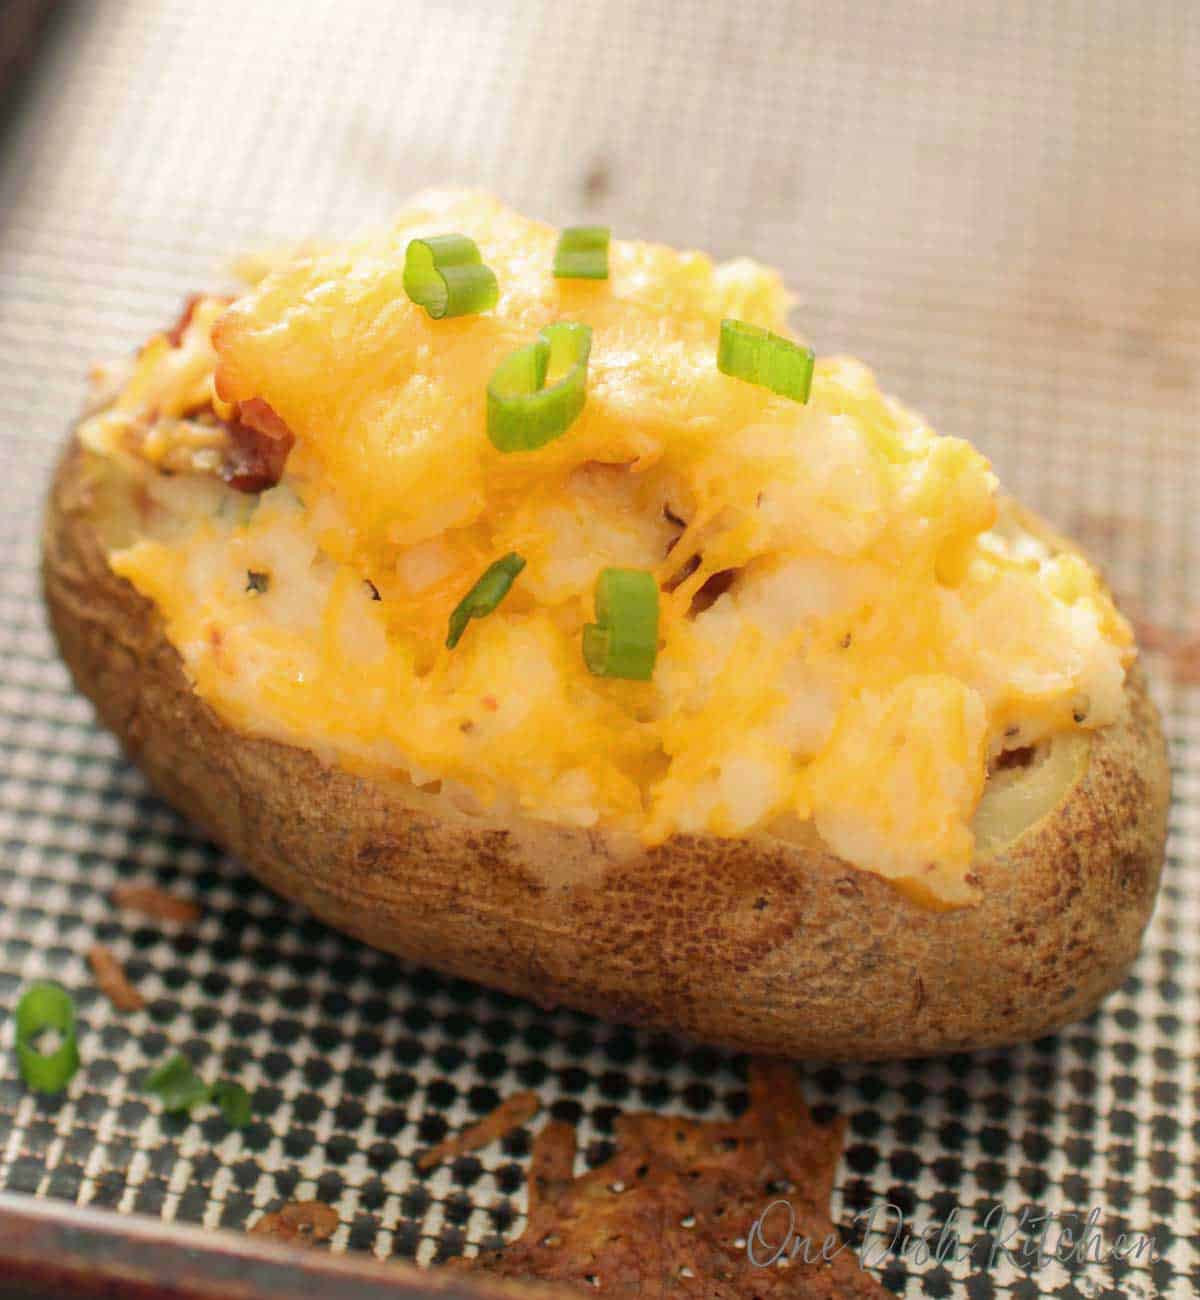 Twice baked potato on a baking sheet topped with cheese and chopped green onions